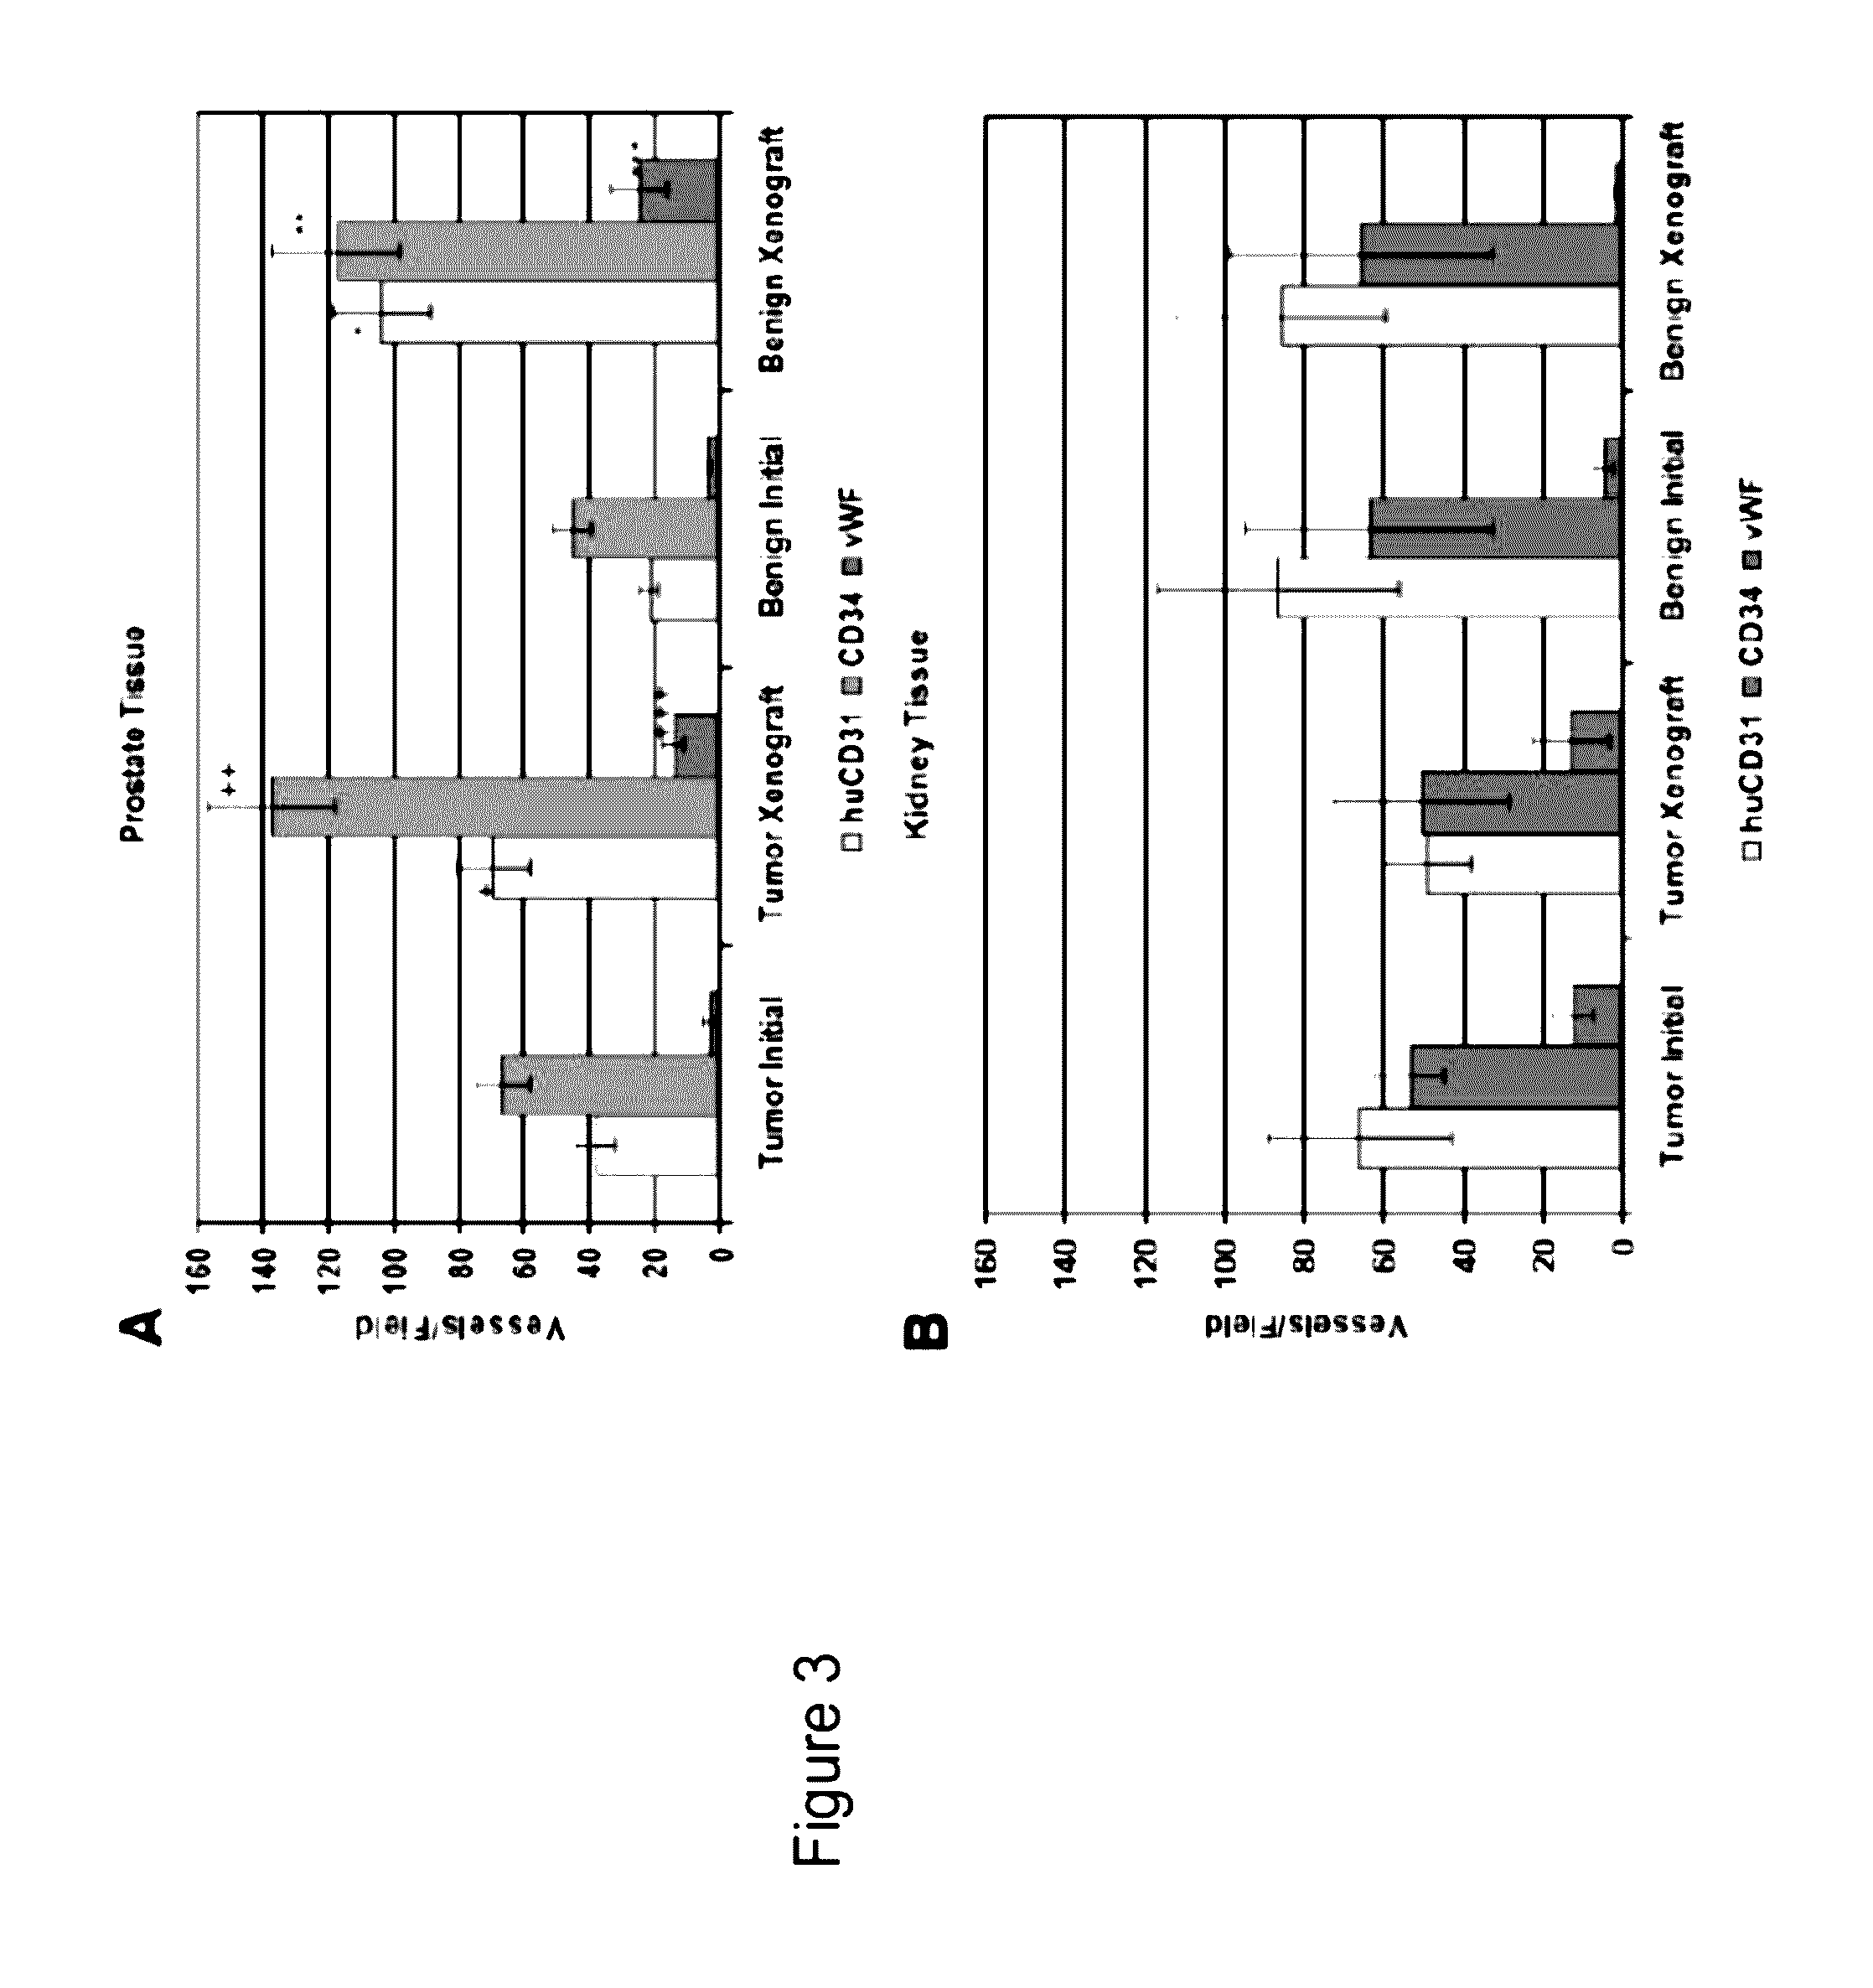 Methods for evaluating and implementing prostate disease treatments